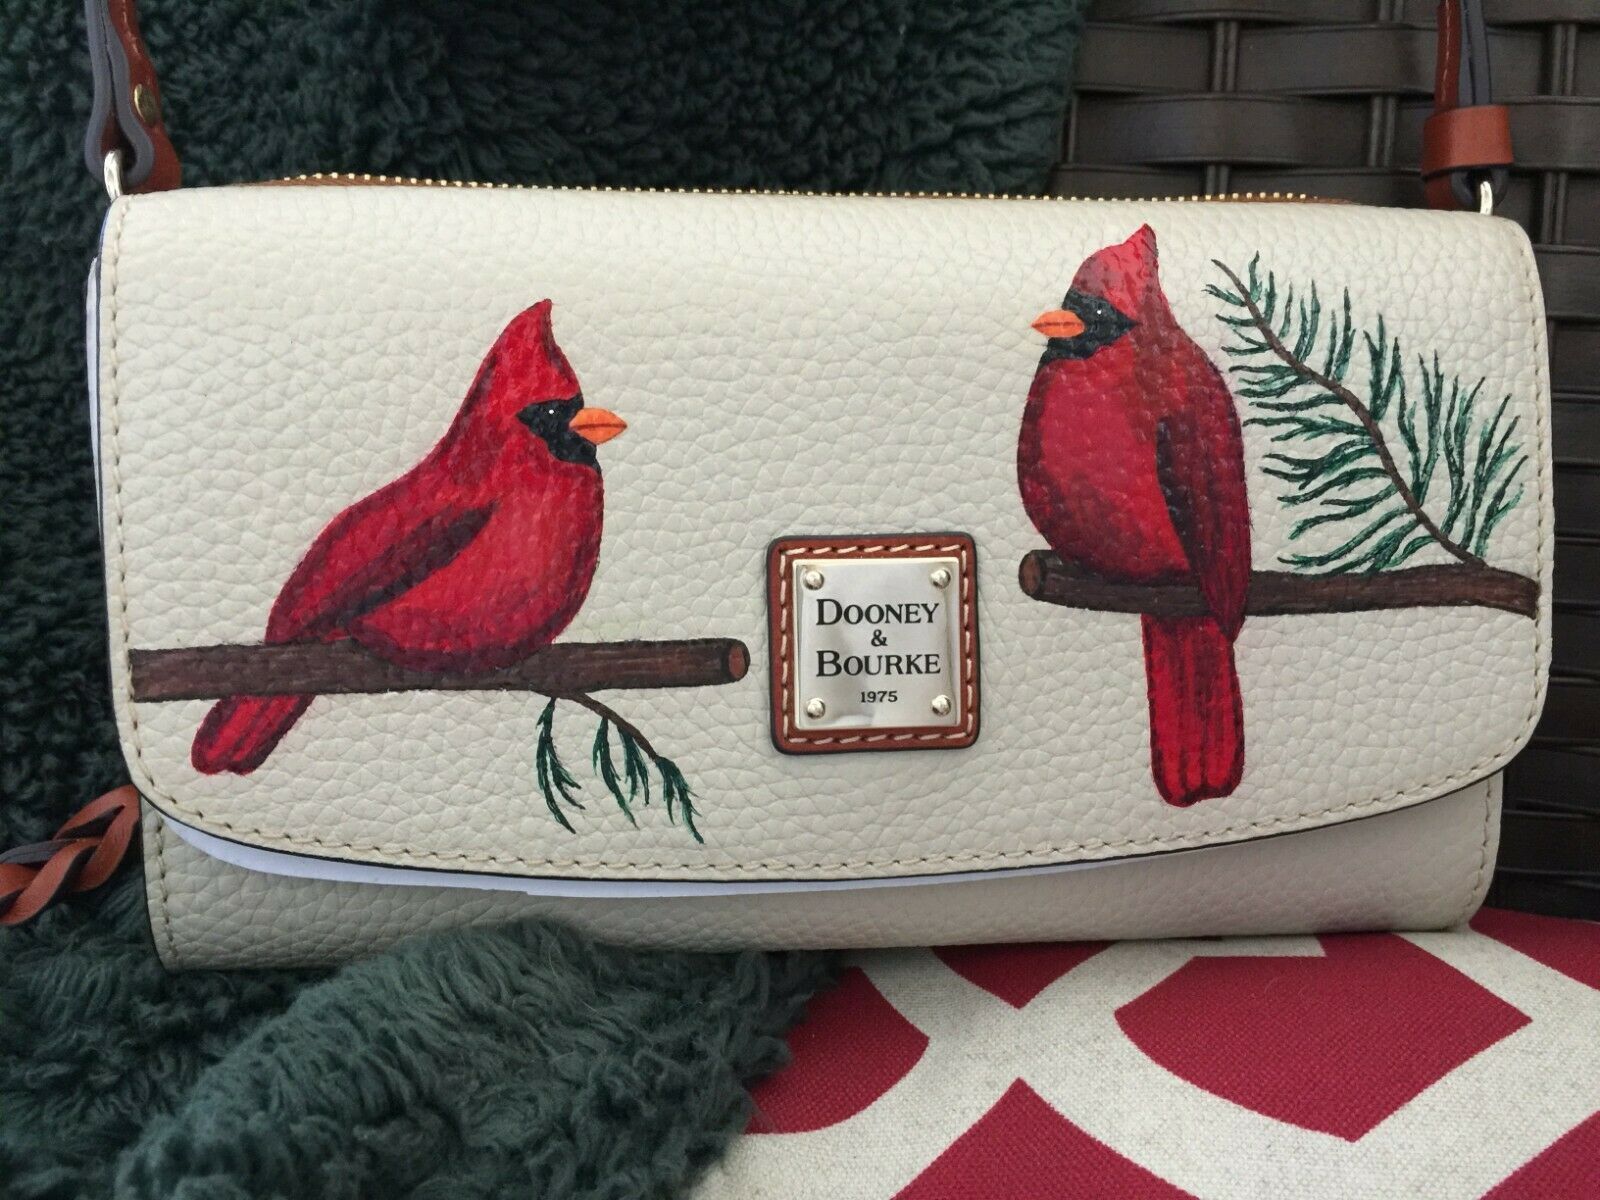 Primary image for Dooney and Bourke Clutch Wallet, Hand Painted Red Cardinals, Christmas Gift